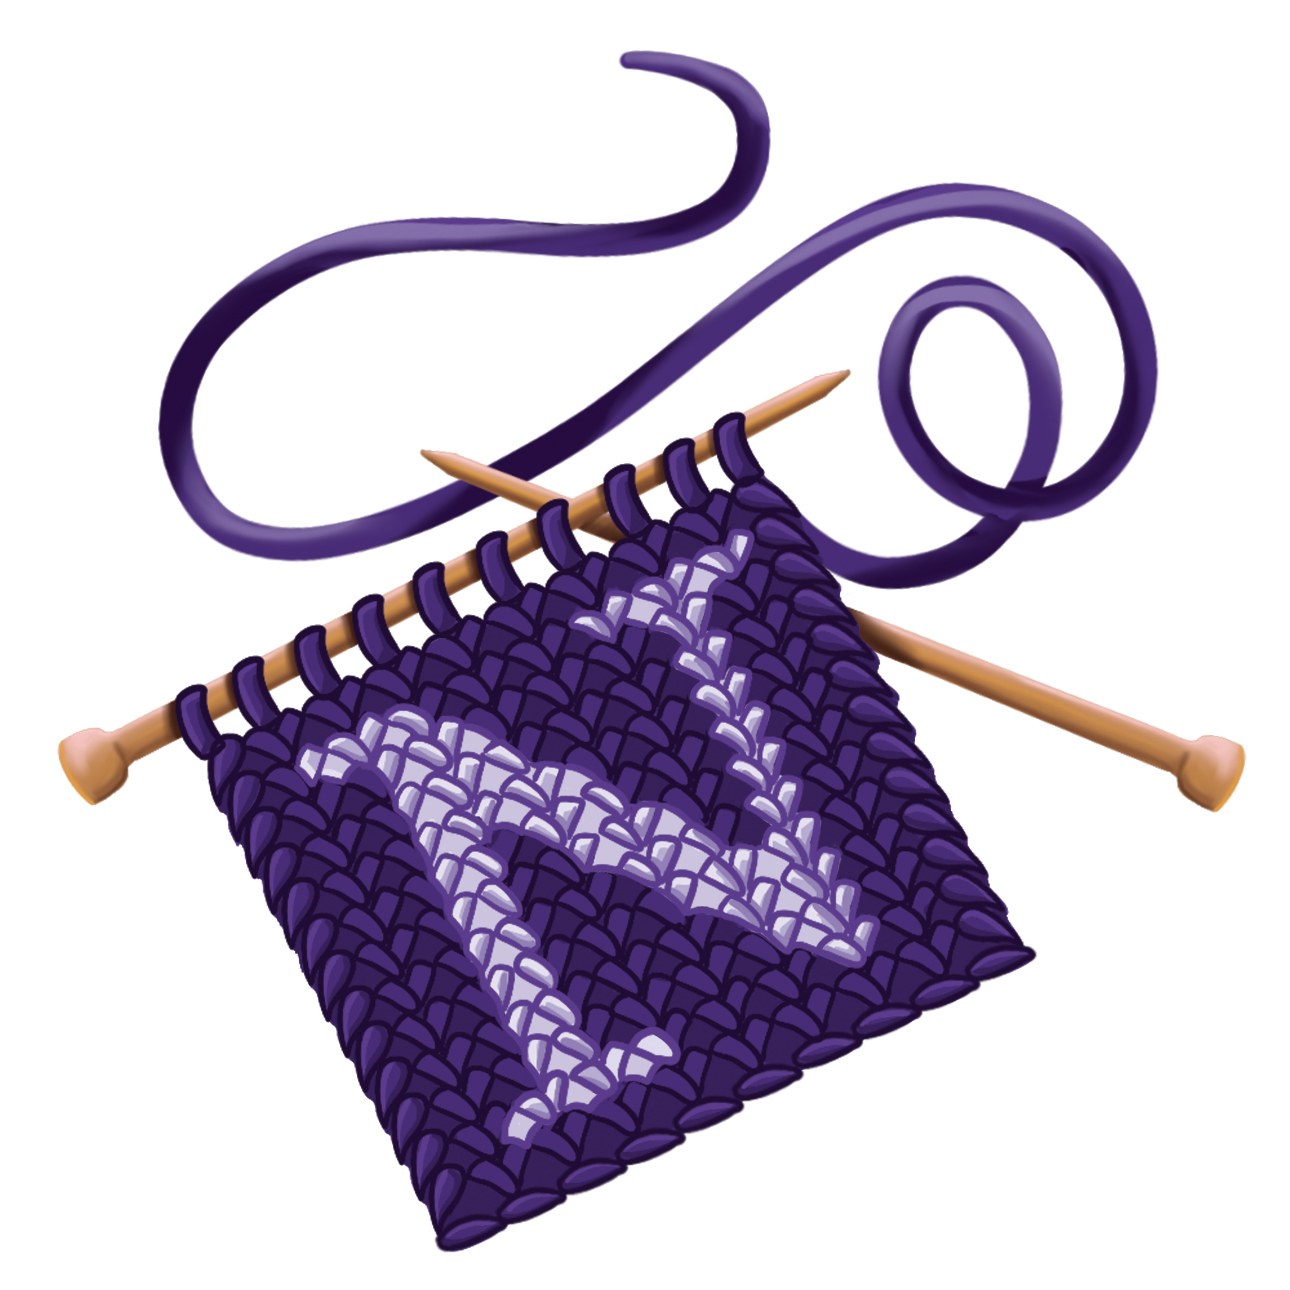 Illustration of a knitted square with Northwestern's "N" 